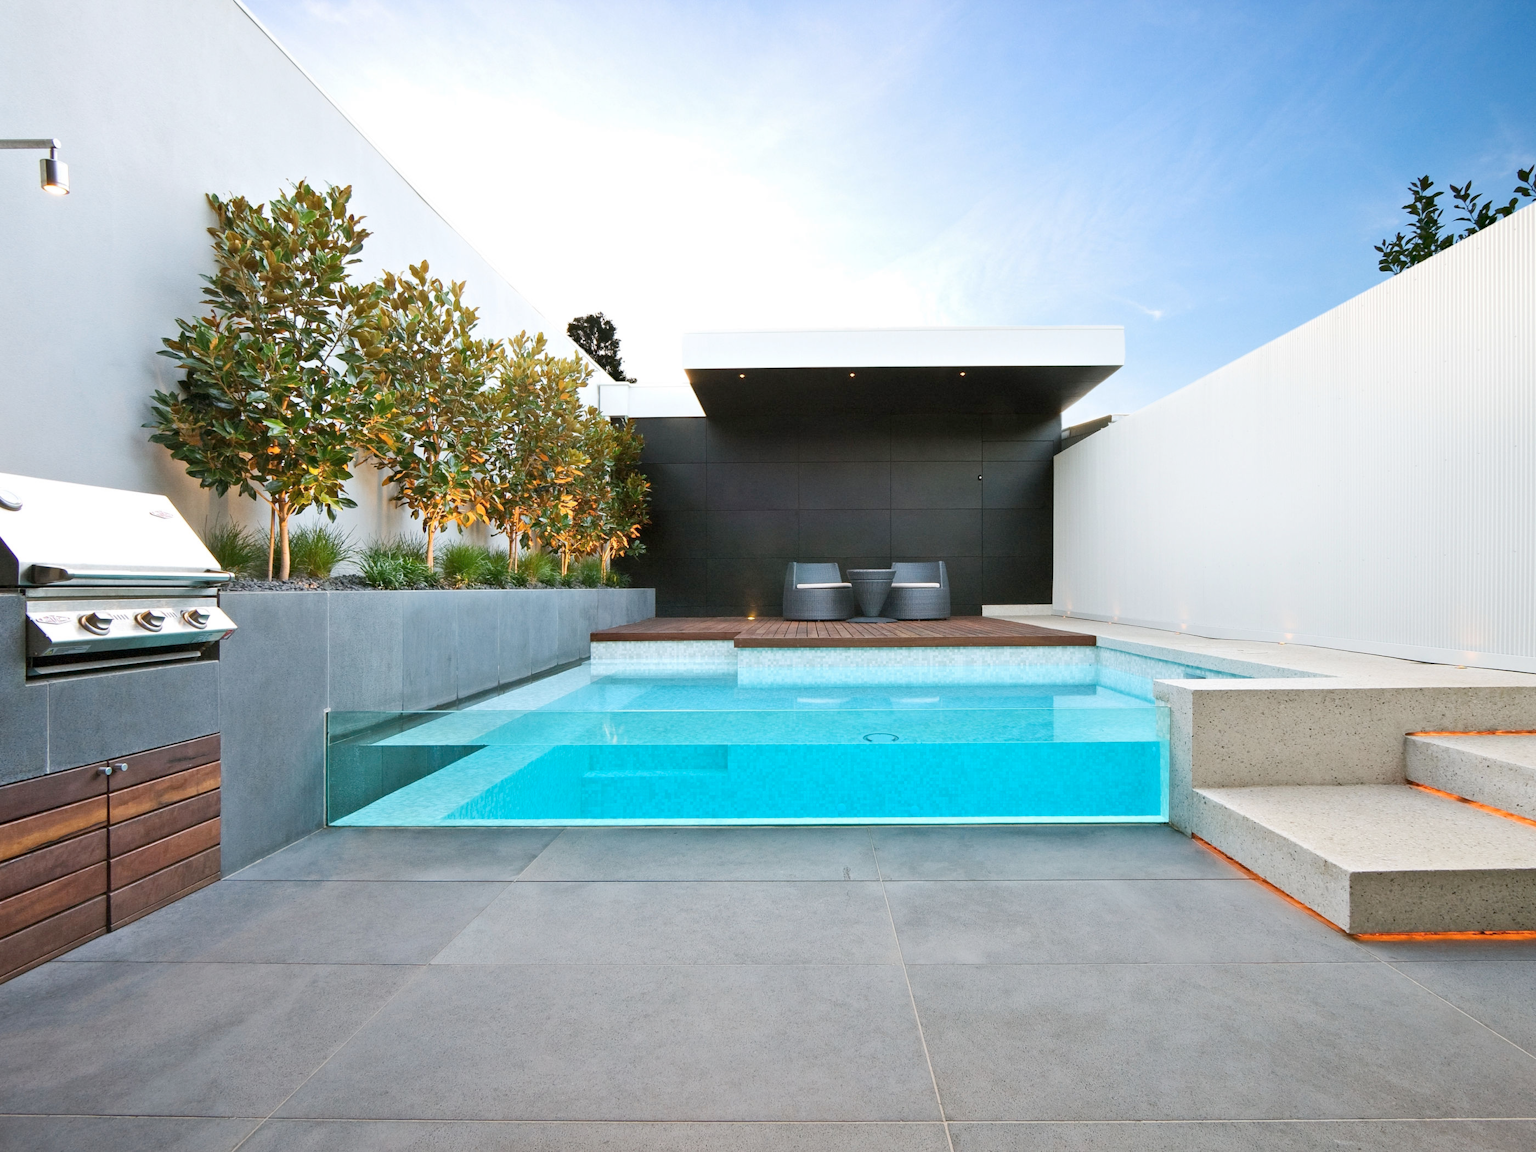 Large bluestone pavers used as pool wall and BBQ area